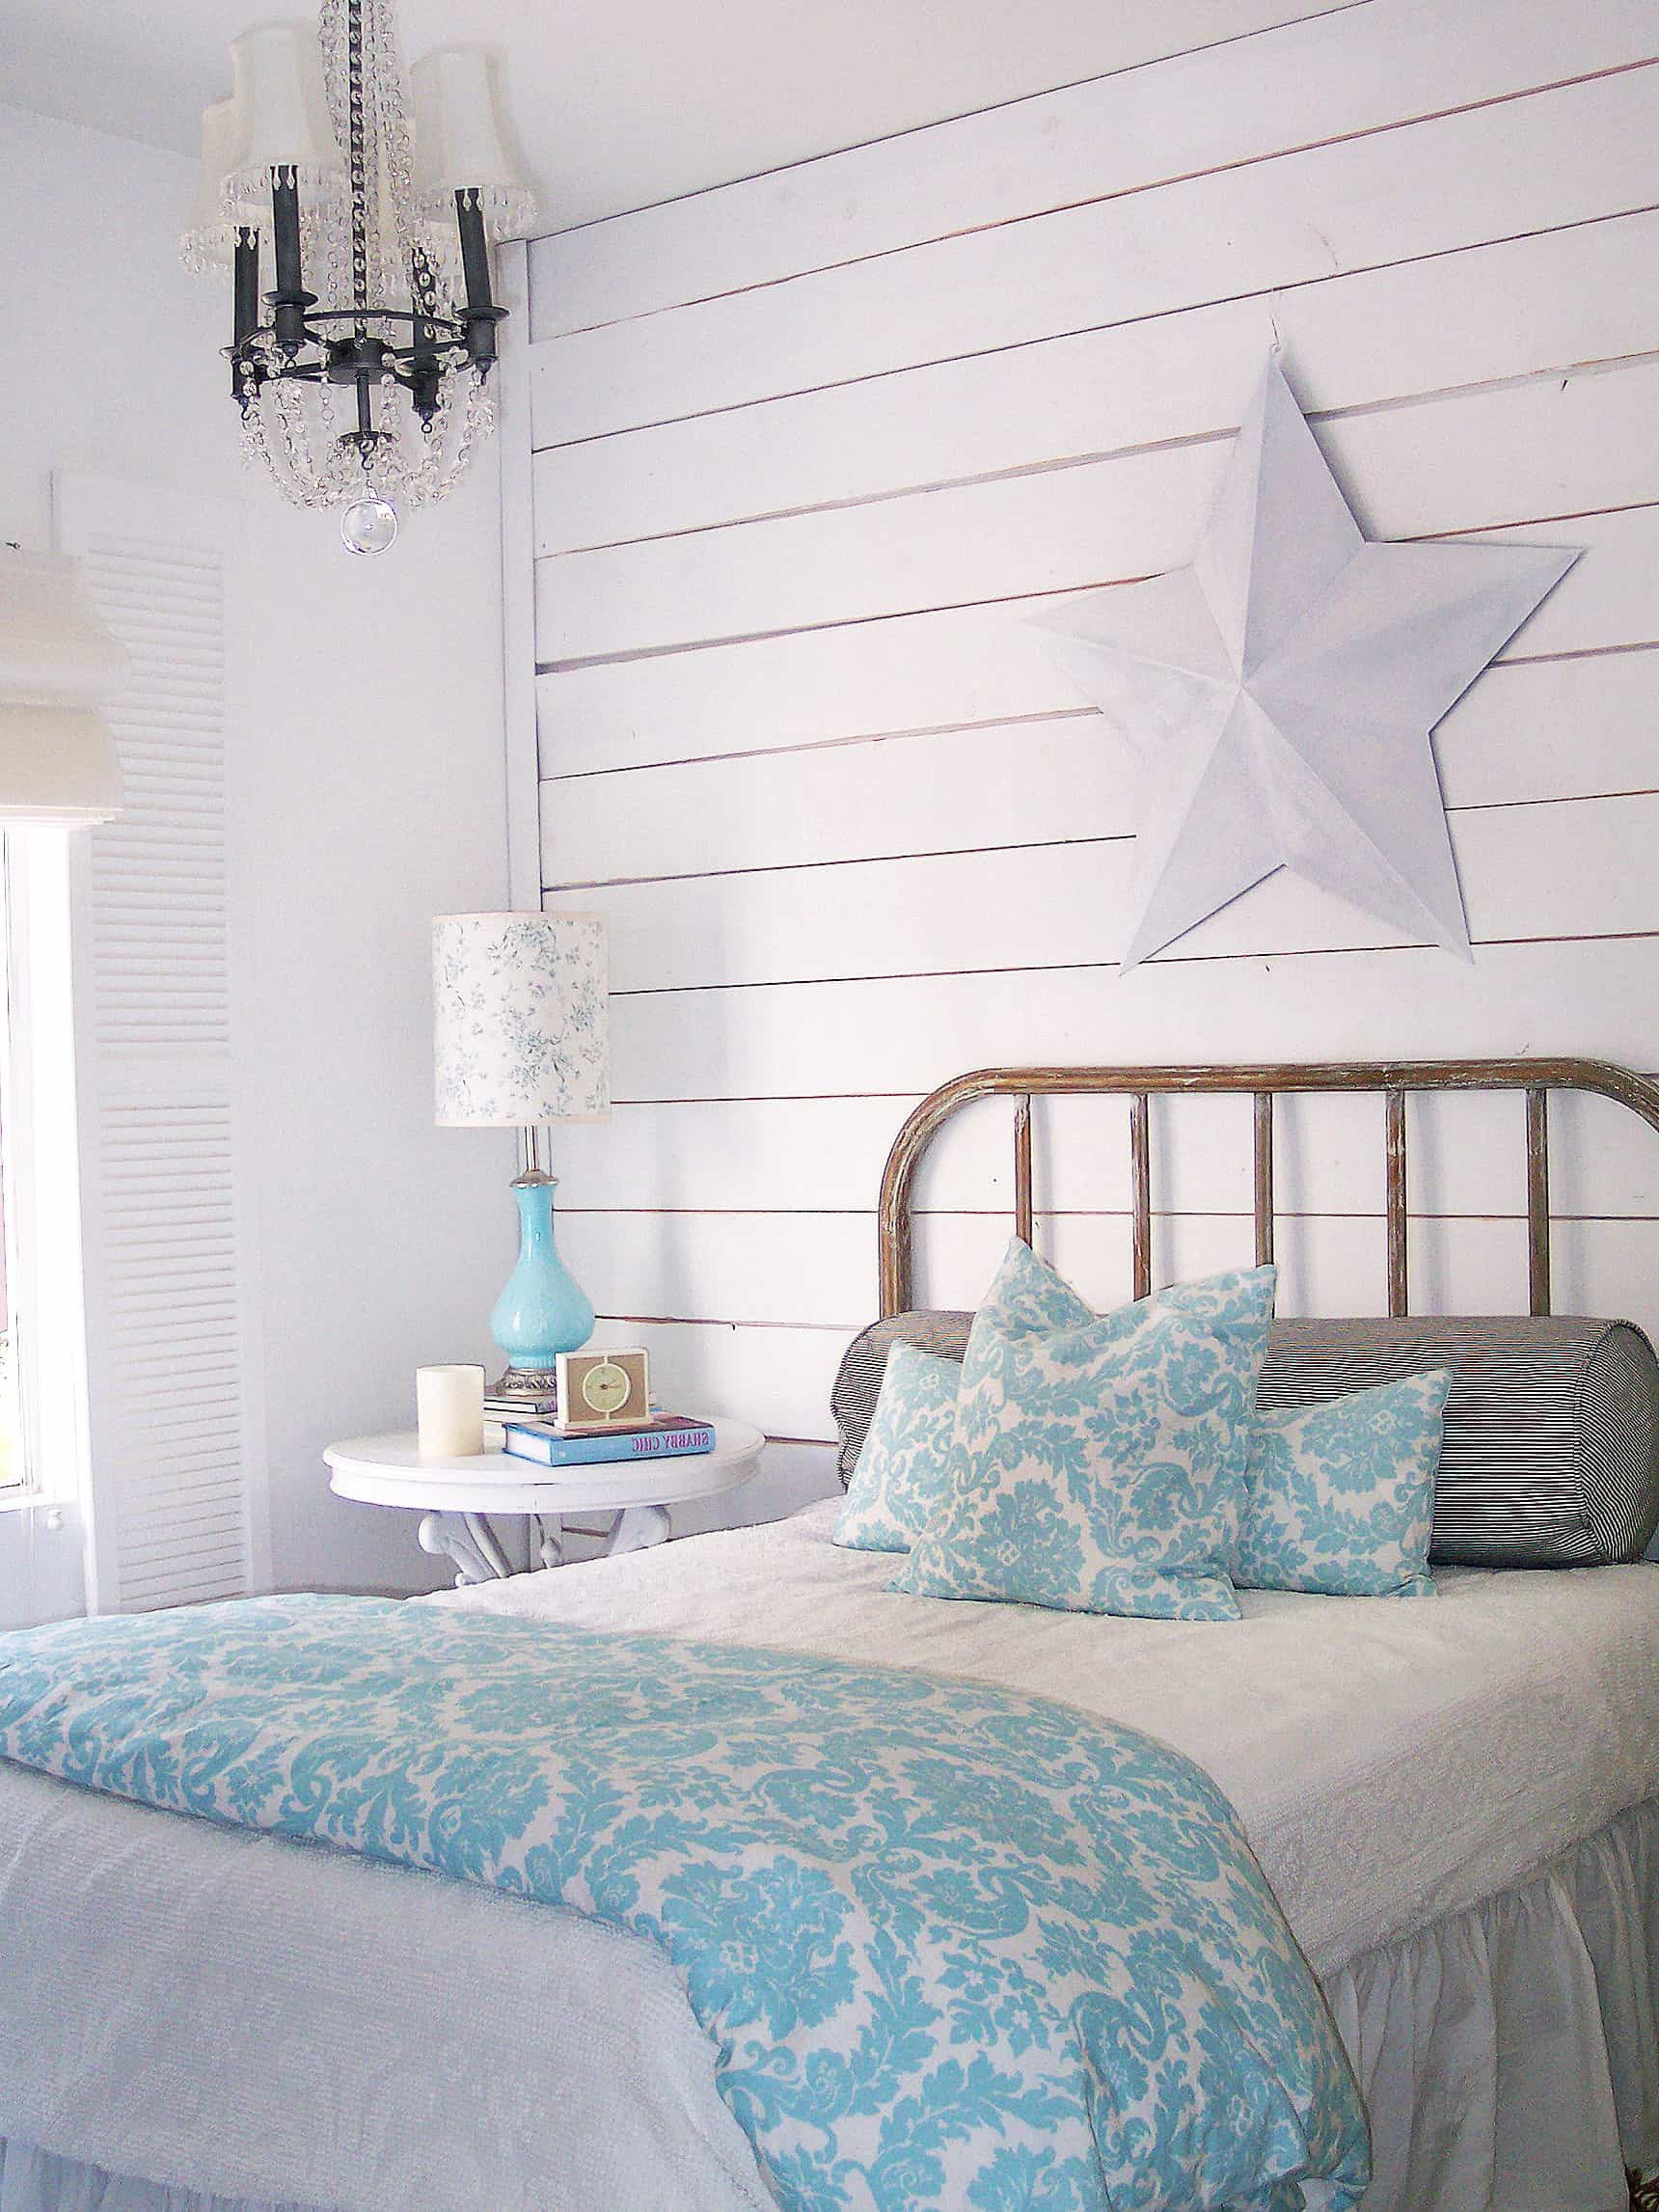 Modern Shabby Chic Bedroom
 How To Decorate A Shabby Chic Bedroom